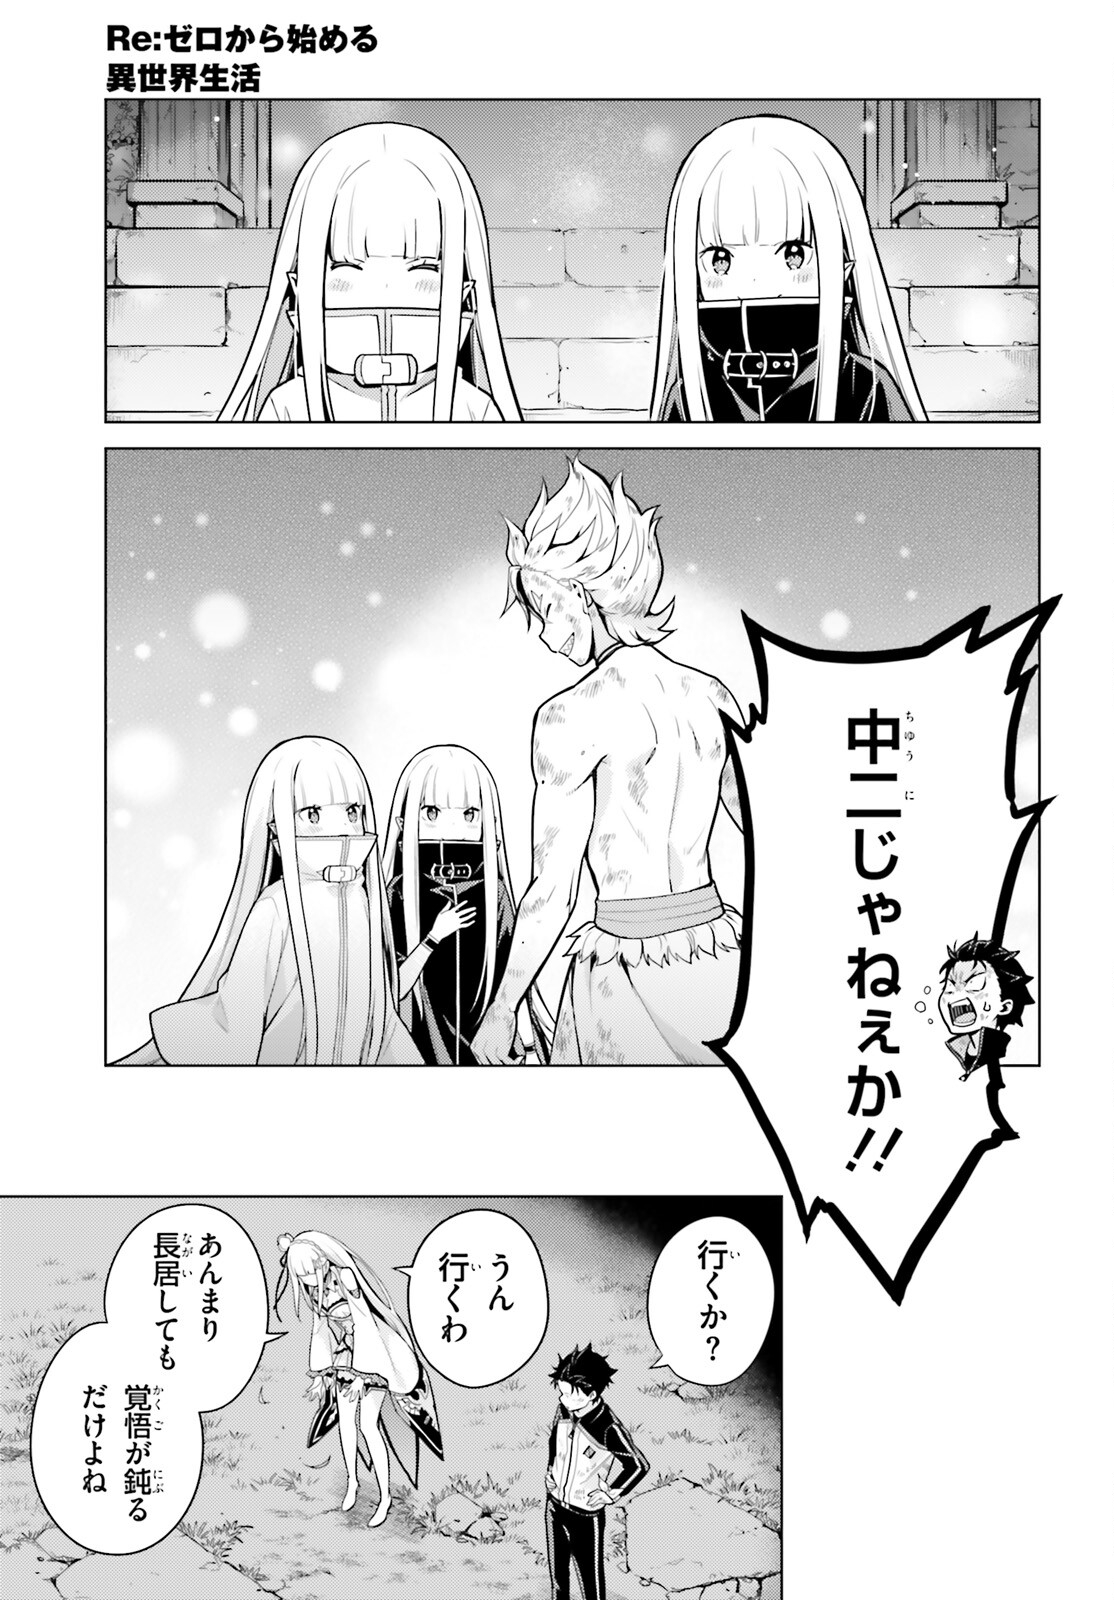 Reゼロから始める異世界生活 第四章 聖域と強欲の魔女 第50話 - Page 11